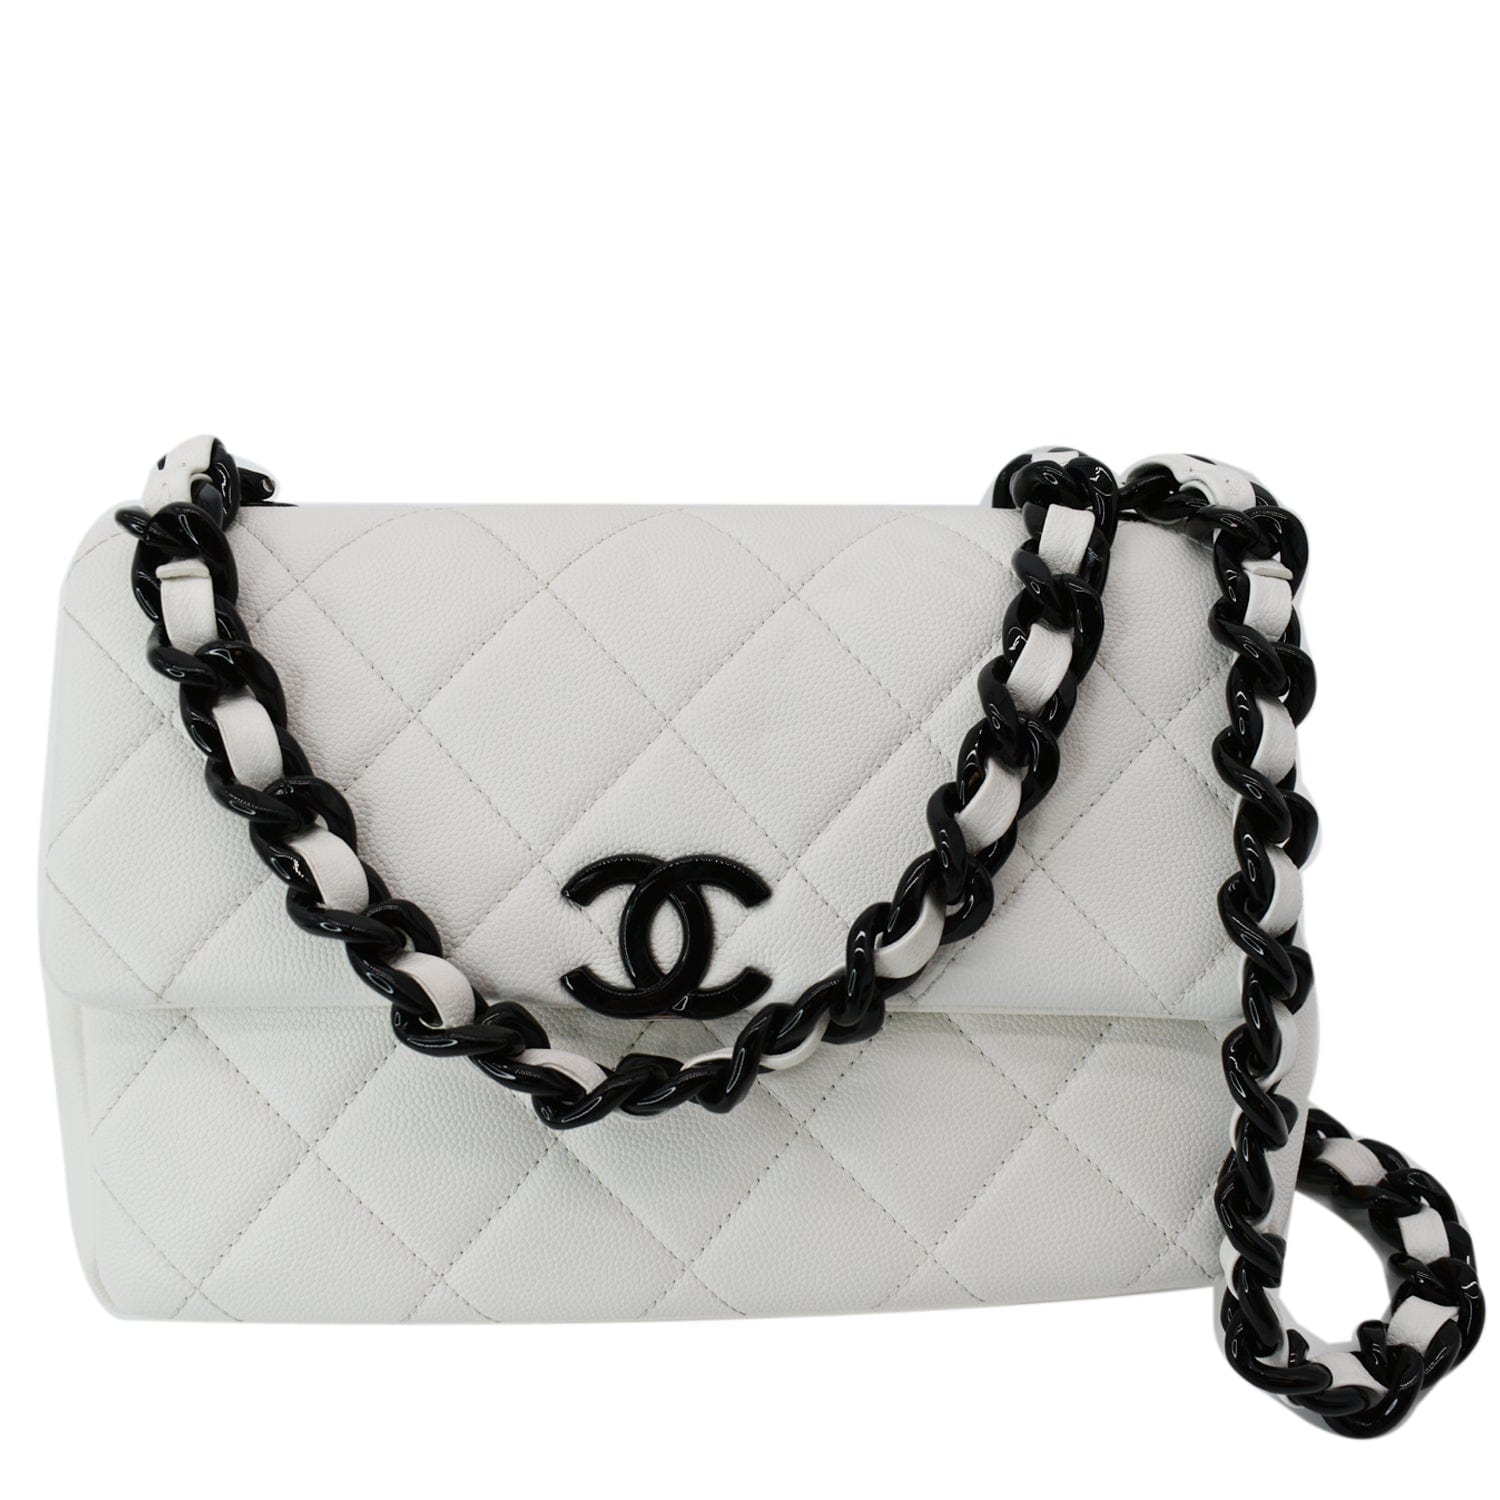 CHANEL Calfskin Quilted Medium Graphic Flap Black White | FASHIONPHILE